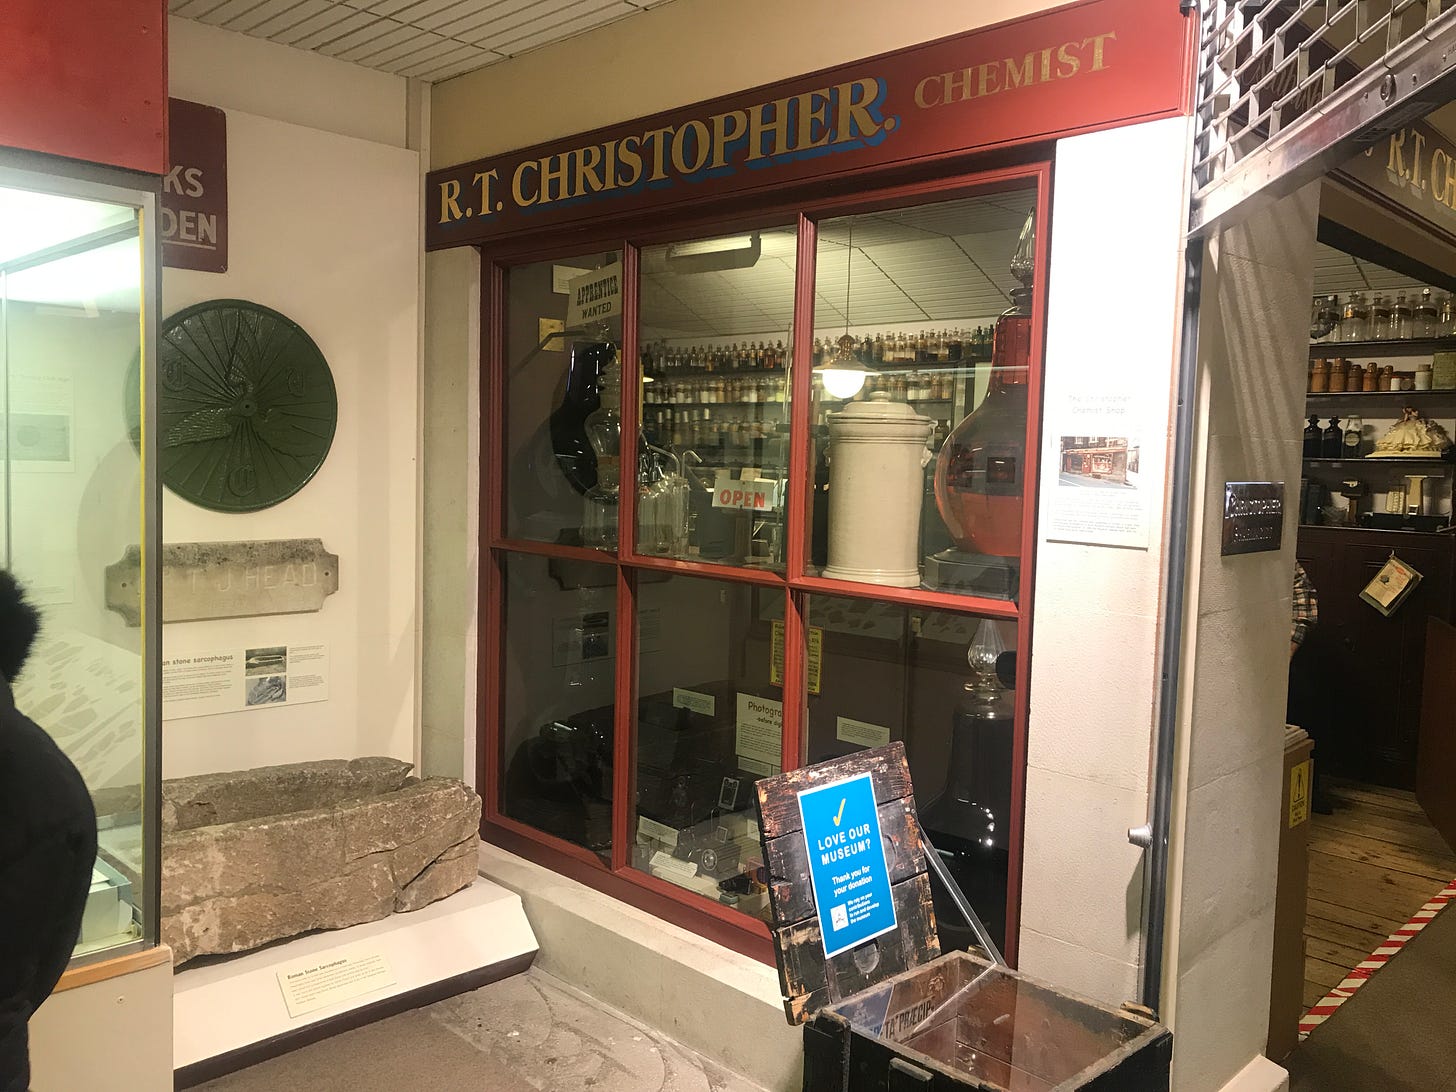 The Christopher Chemist Shop re-created in the Bradford on Avon Museum.